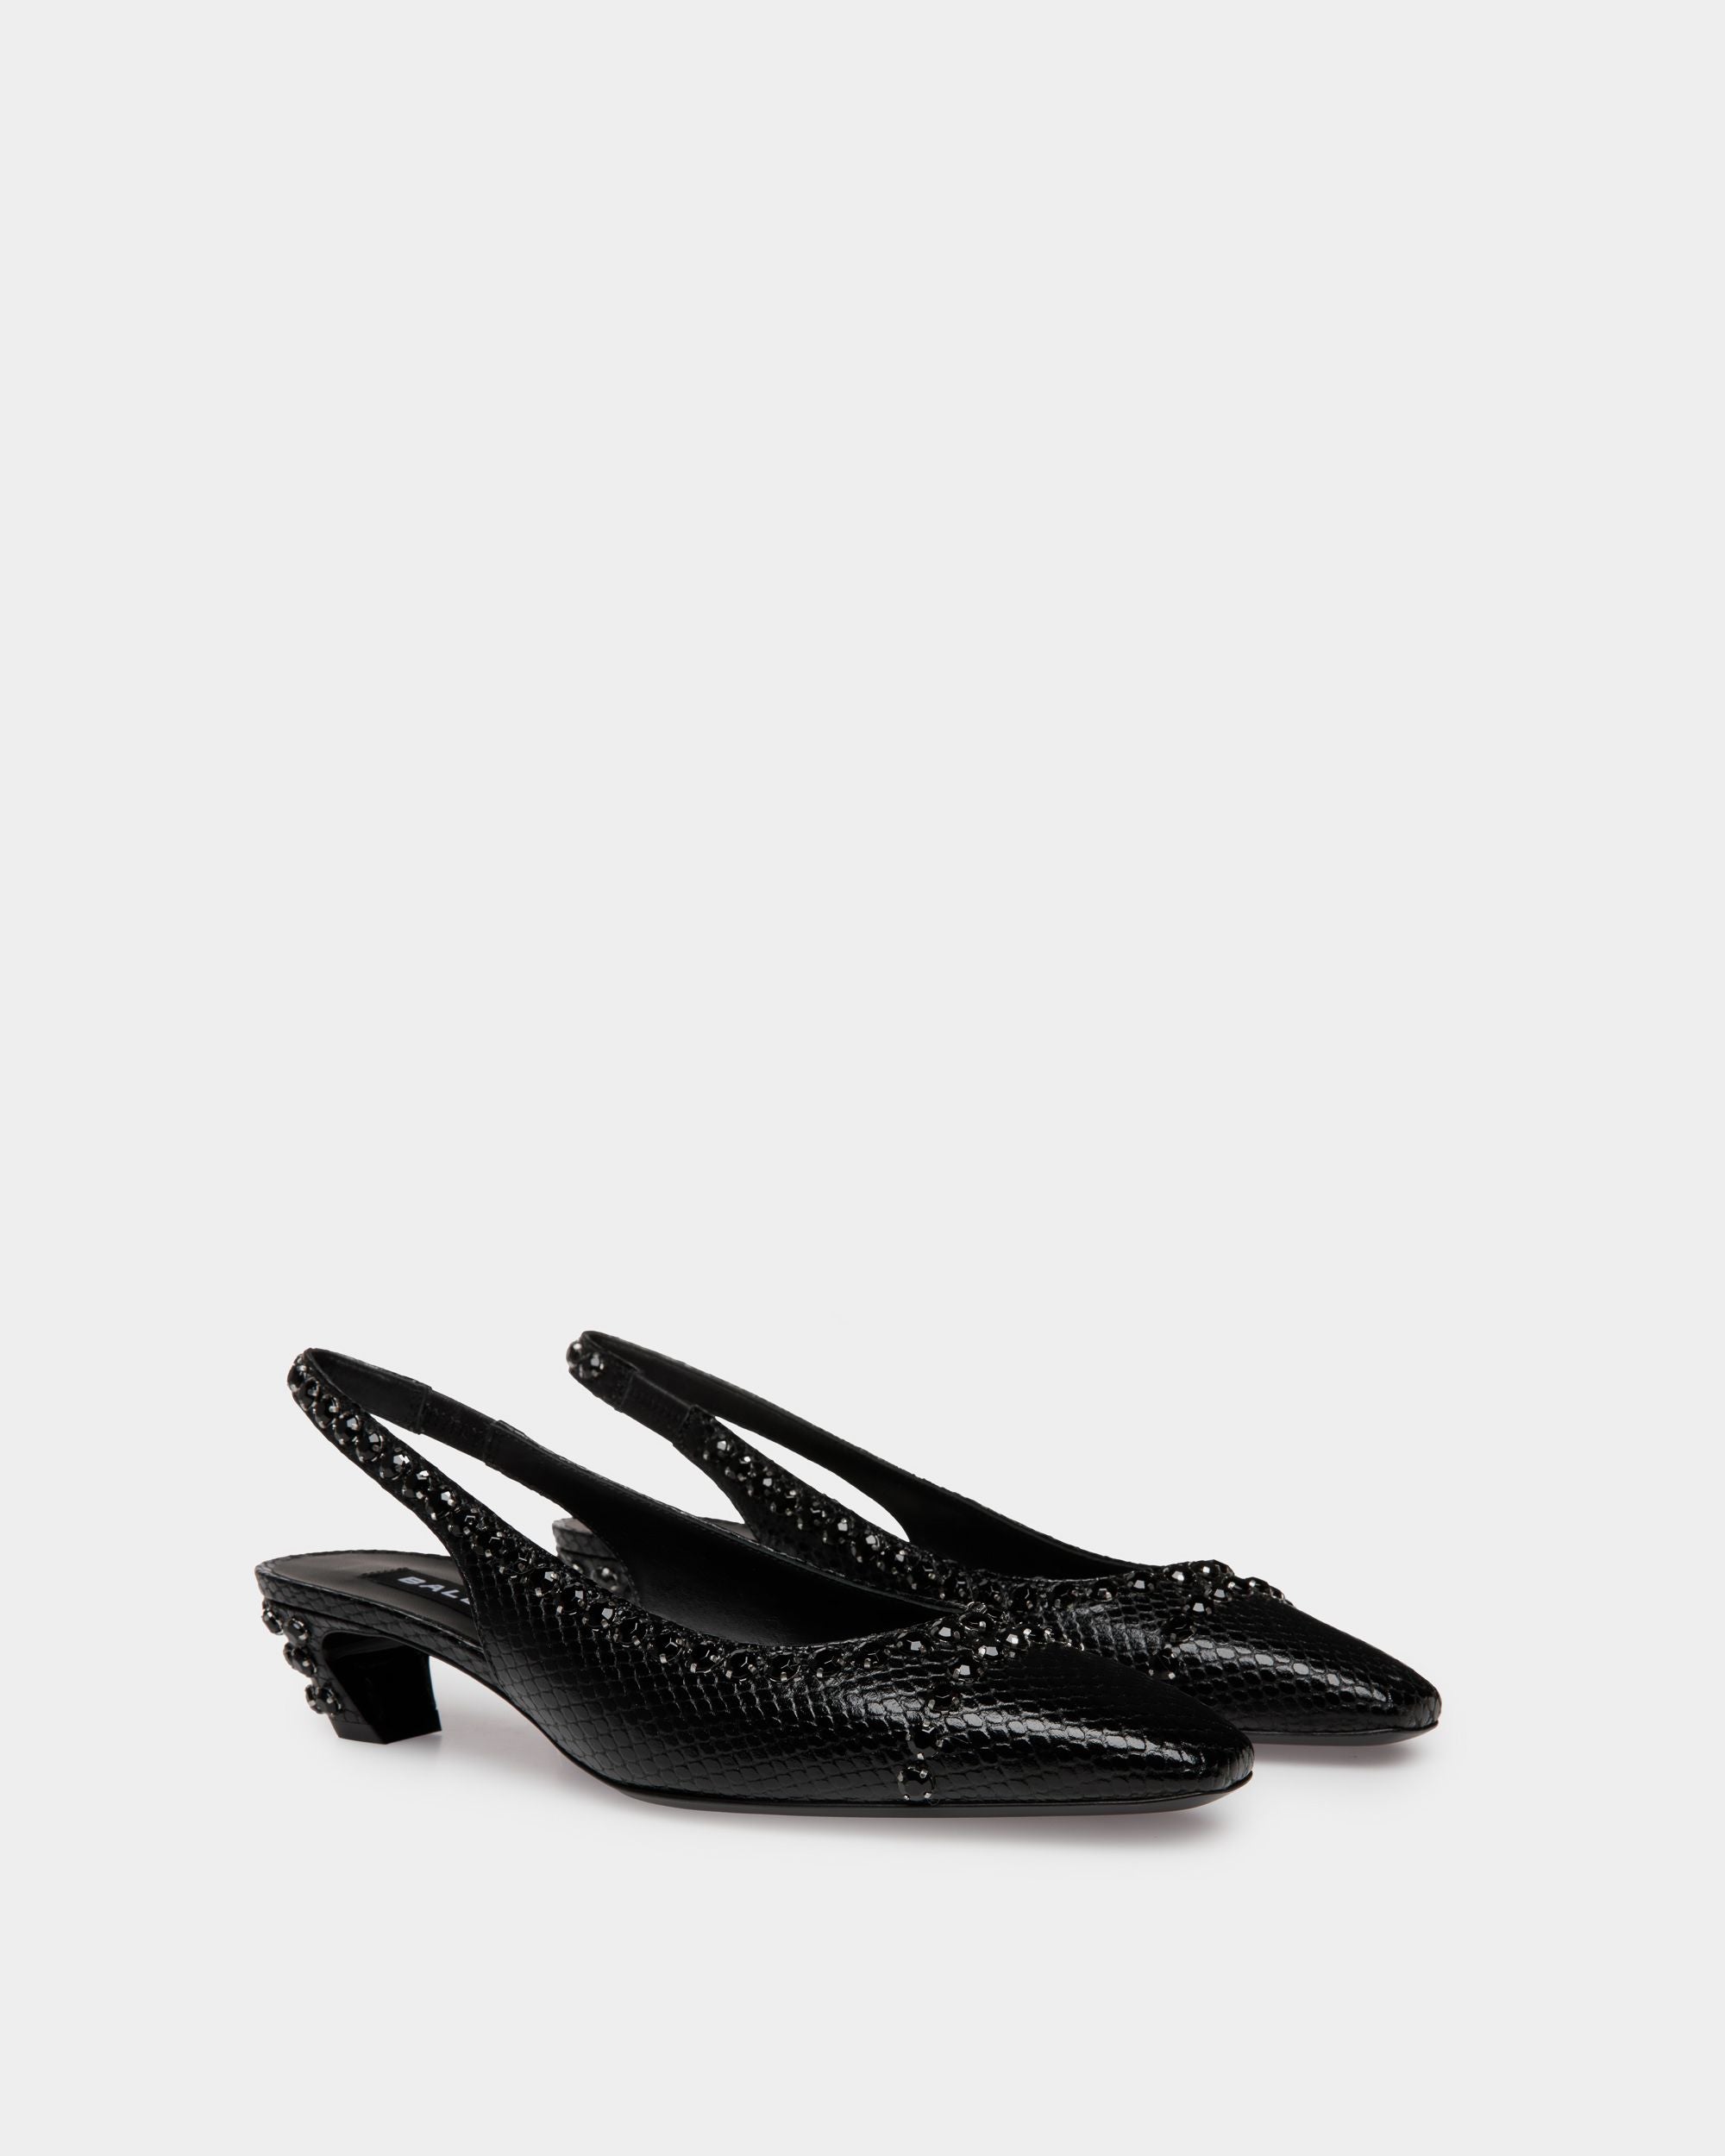 Sylt | Women's Slingback Pump in Black Python Printed Leather | Bally | Still Life 3/4 Front